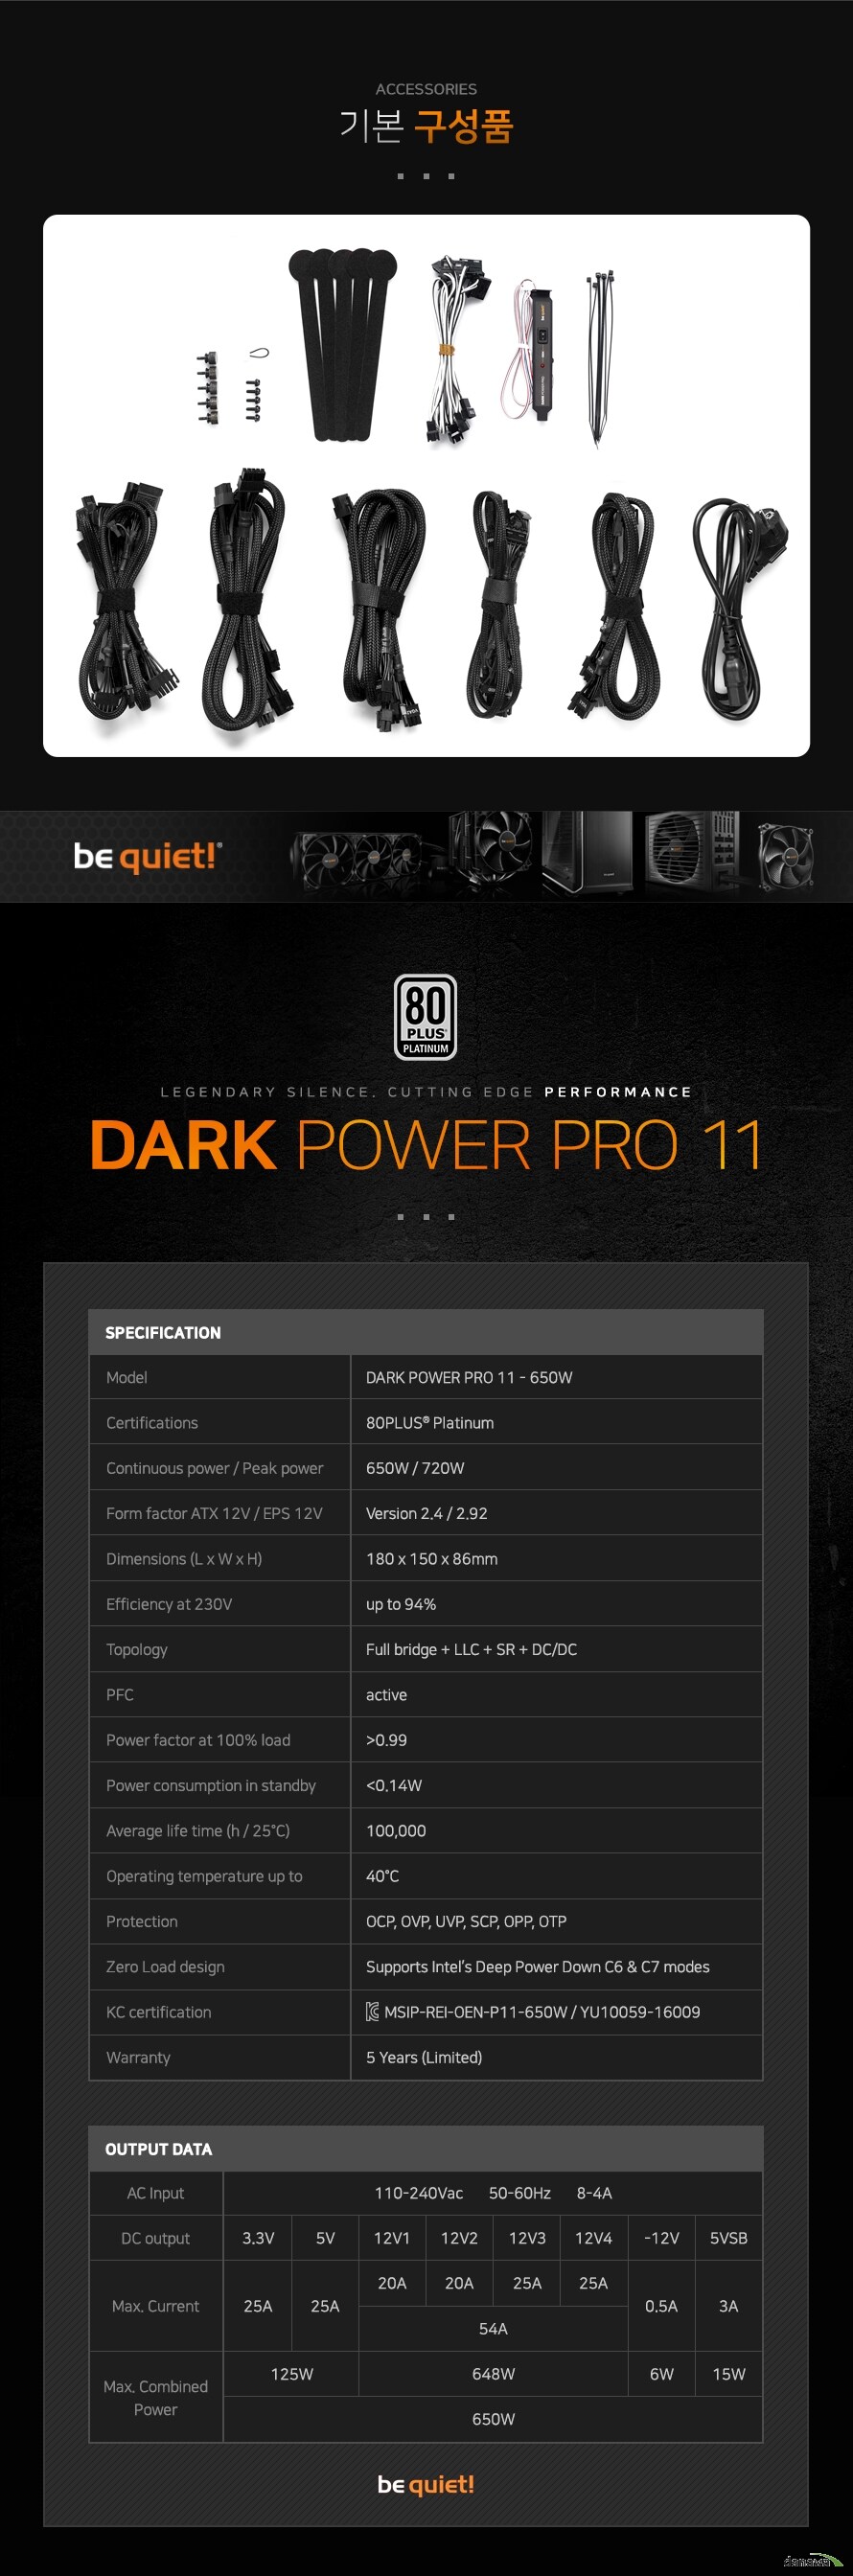 ⺻ ǰũ ̺ Ÿ 5ȸ öƽ ̺ Ÿ 6ճ 5 5׽Ʈ ÿ  1 ̺ 5Ŭŷ Űⷯ ̺ 6ModelDARK POWER PRO& 11 - 650WCertifications80PLUS & PlatinumContinuous power / Peak power650W / 720WForm factor& ATX& 12V / EPS 12VVersion 2.4 / 2.92Dimensions (L x W x H)180 x 150 x 86mmEfficiency at 230Vup to 94%TopologyFull bridge& + LLC +& SR& +& DC/DCPFCactivePower factor at 100% load0.99Power consumption in standby0.14WAverage life time (h / 25)150Operating temperature up to40ProtectionOCP, OVP, UVP, SCP, OPP, OTPZero Load designSupports Intel Deep Power Down C6 & C7 modesKC certification     MSIP-REI-OEN-P11-650W / YU10059-16009Warranty5 Years (Limited)DARK POWER PRO 11 650WAC Input 110&240Vac 50&60Hz 8-4ADC Output 3.3V 5V 12V1 12V2 12V3 12V4 -12V 5VSBMax. Current 25A 25A 20A 20A 25A 25A 0.5A 3A 54AMax. Combined Power 140W 648W 6W 15W 650W